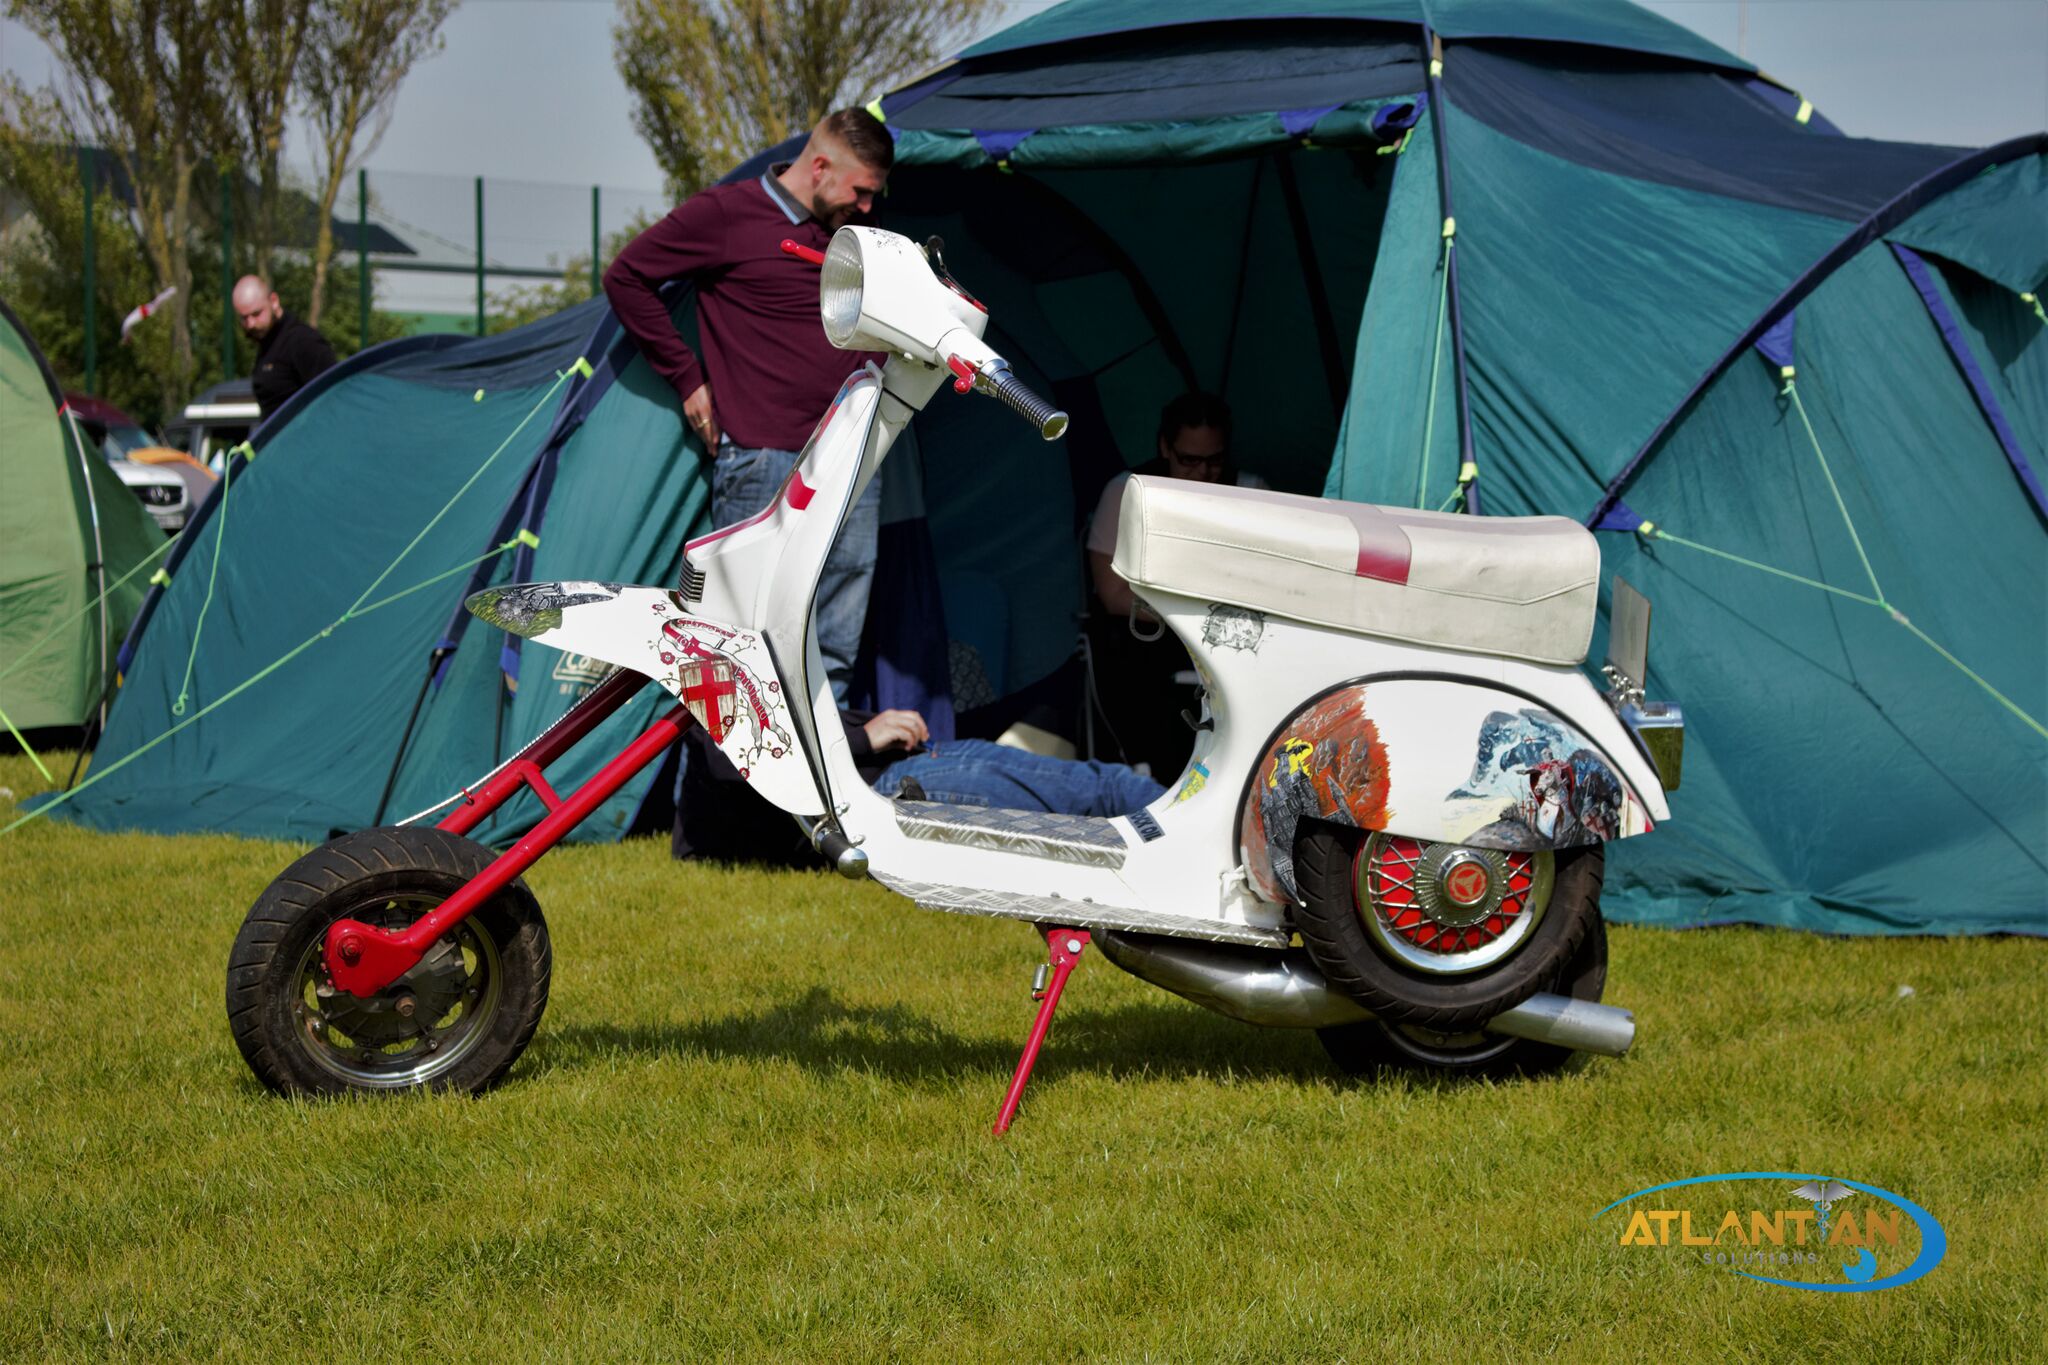 skegness scooter rally 2017  atlantian solutions image 2651